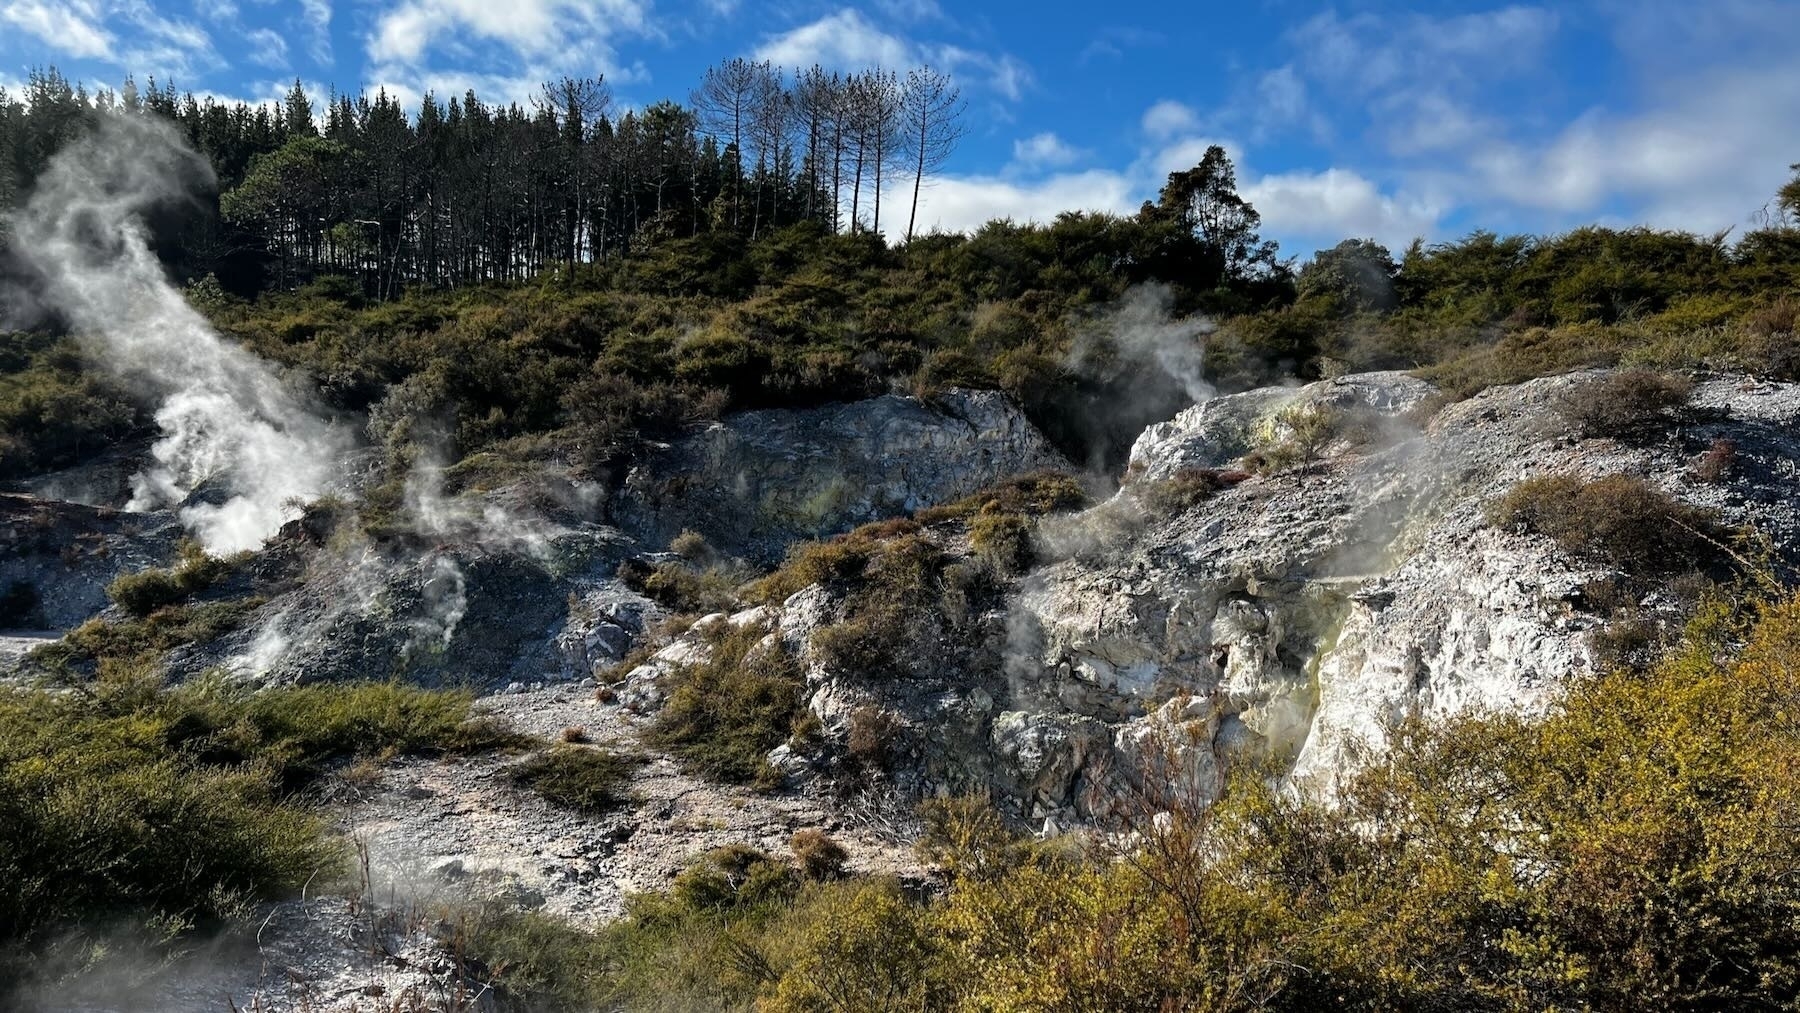 Scrub, white rocks and craters, steam.